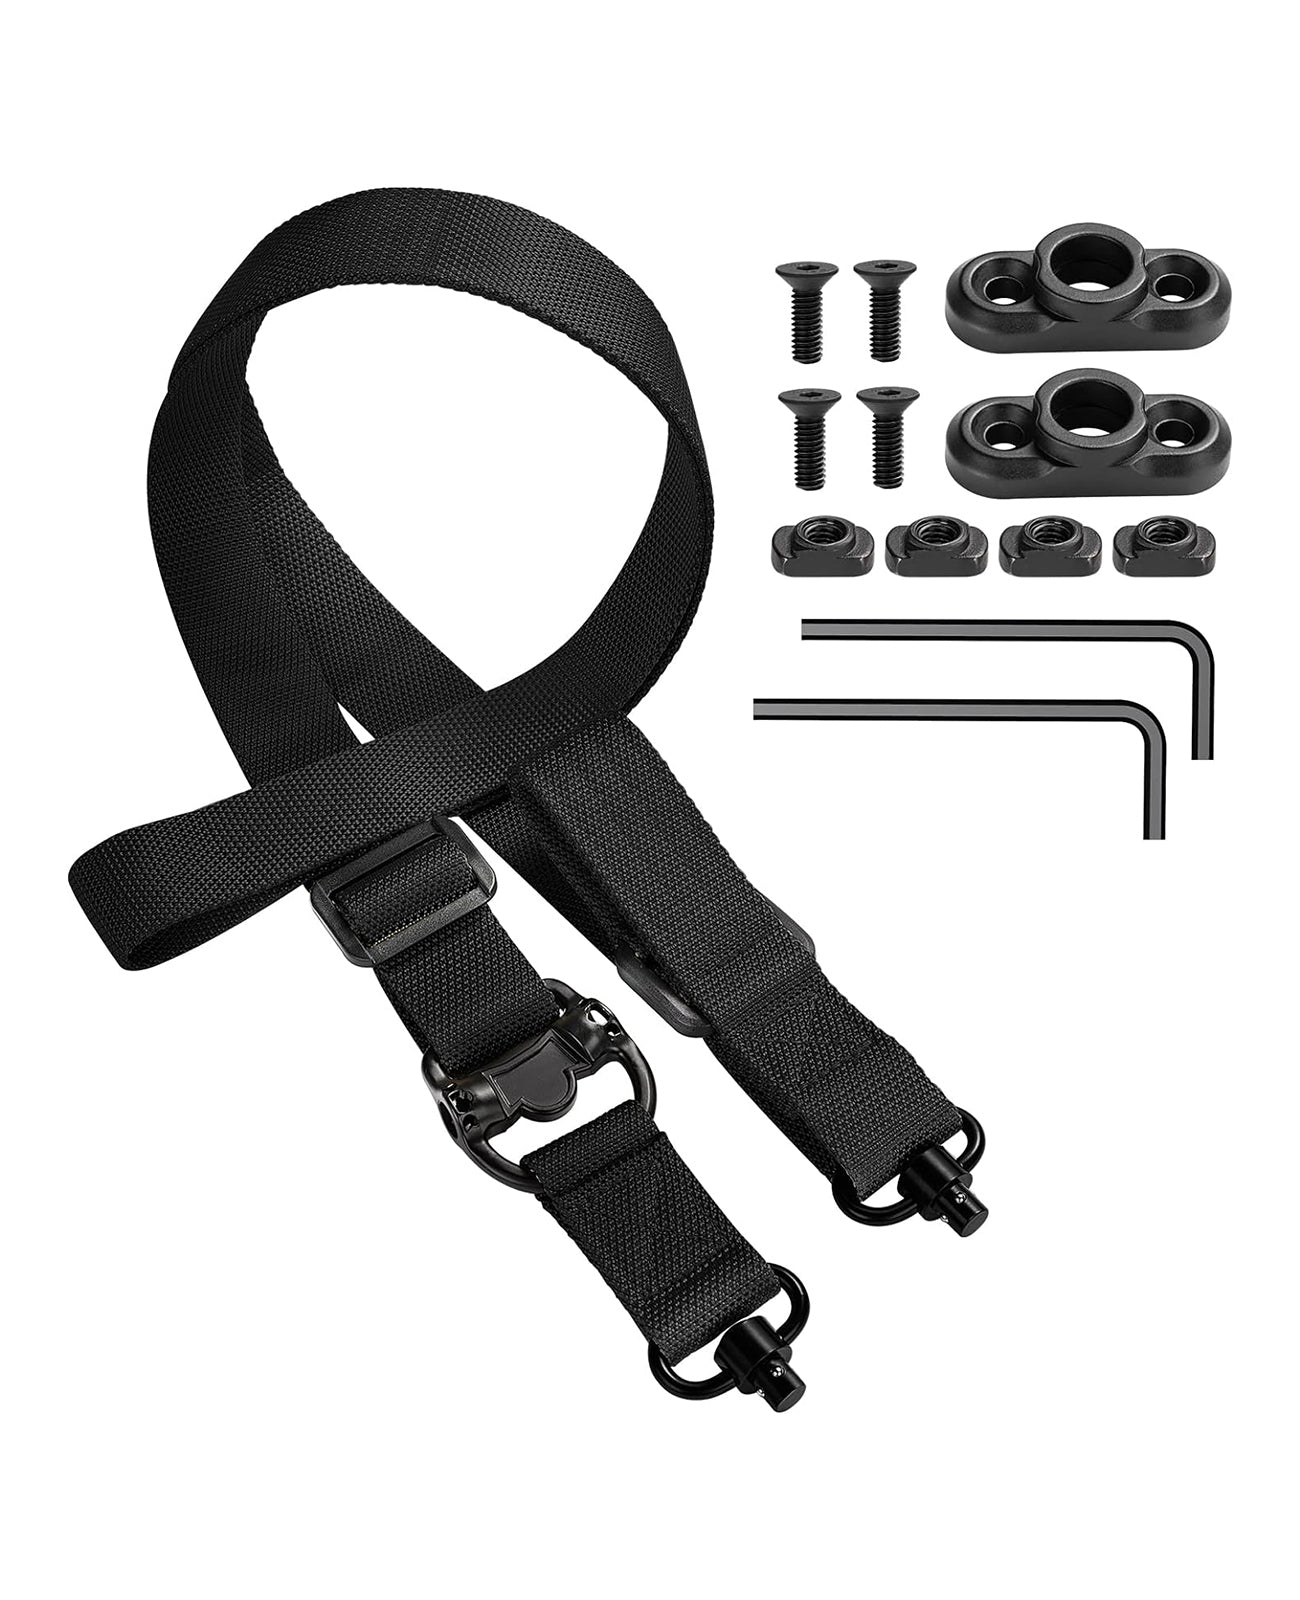 EZshoot Rifle Sling 1.25" Wide 2 Point Sling with 2 Pack Sling Swivels